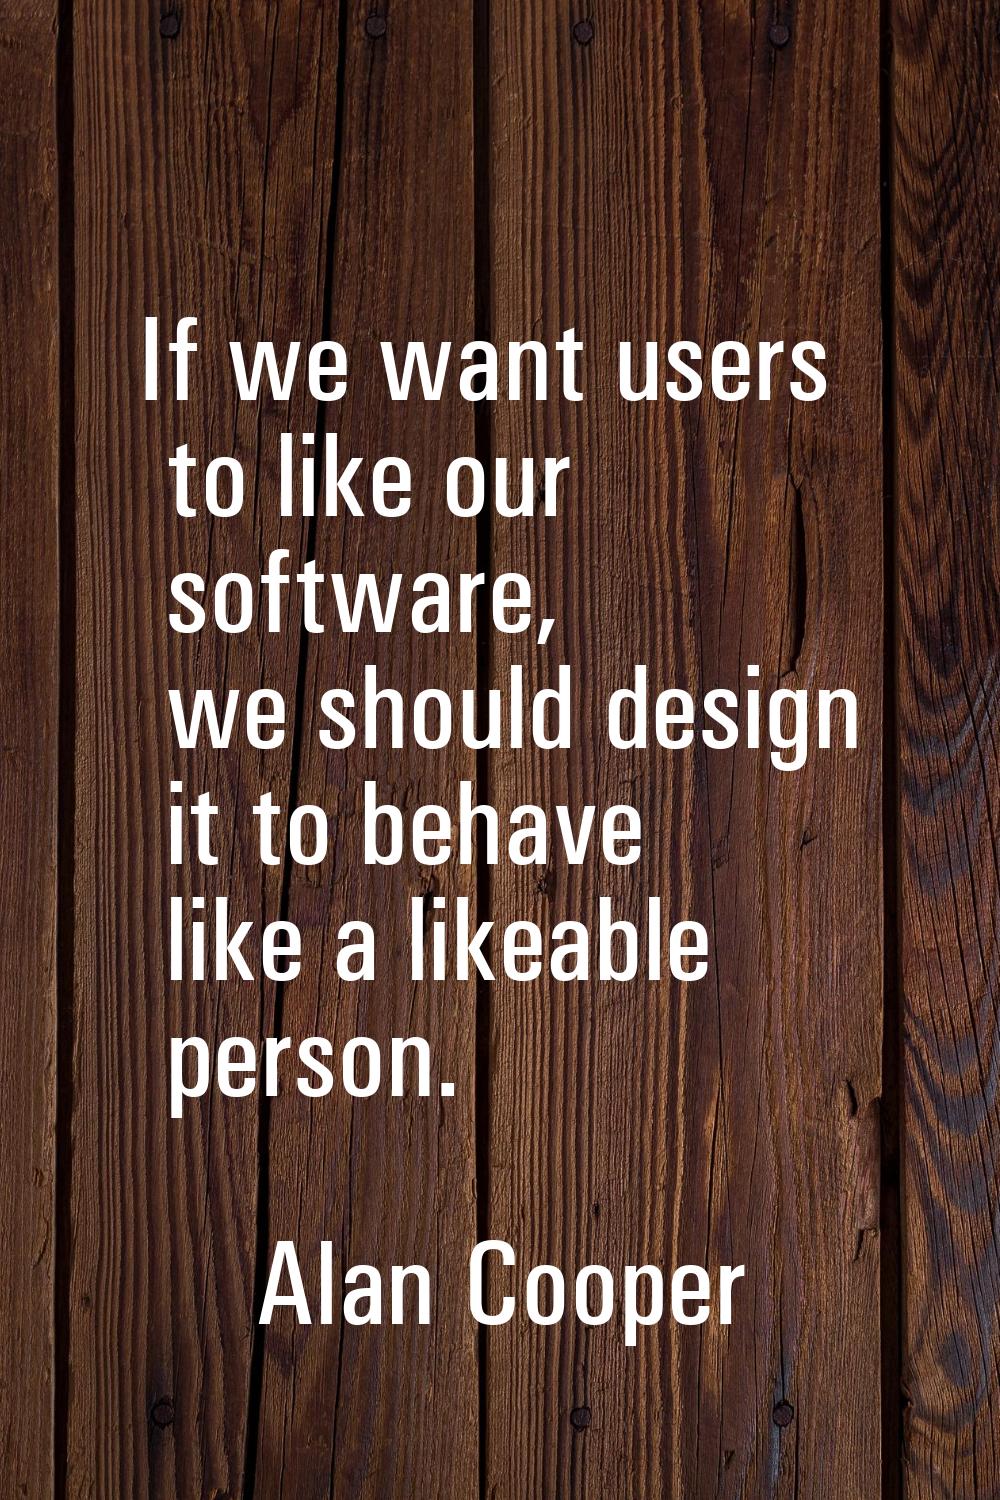 If we want users to like our software, we should design it to behave like a likeable person.